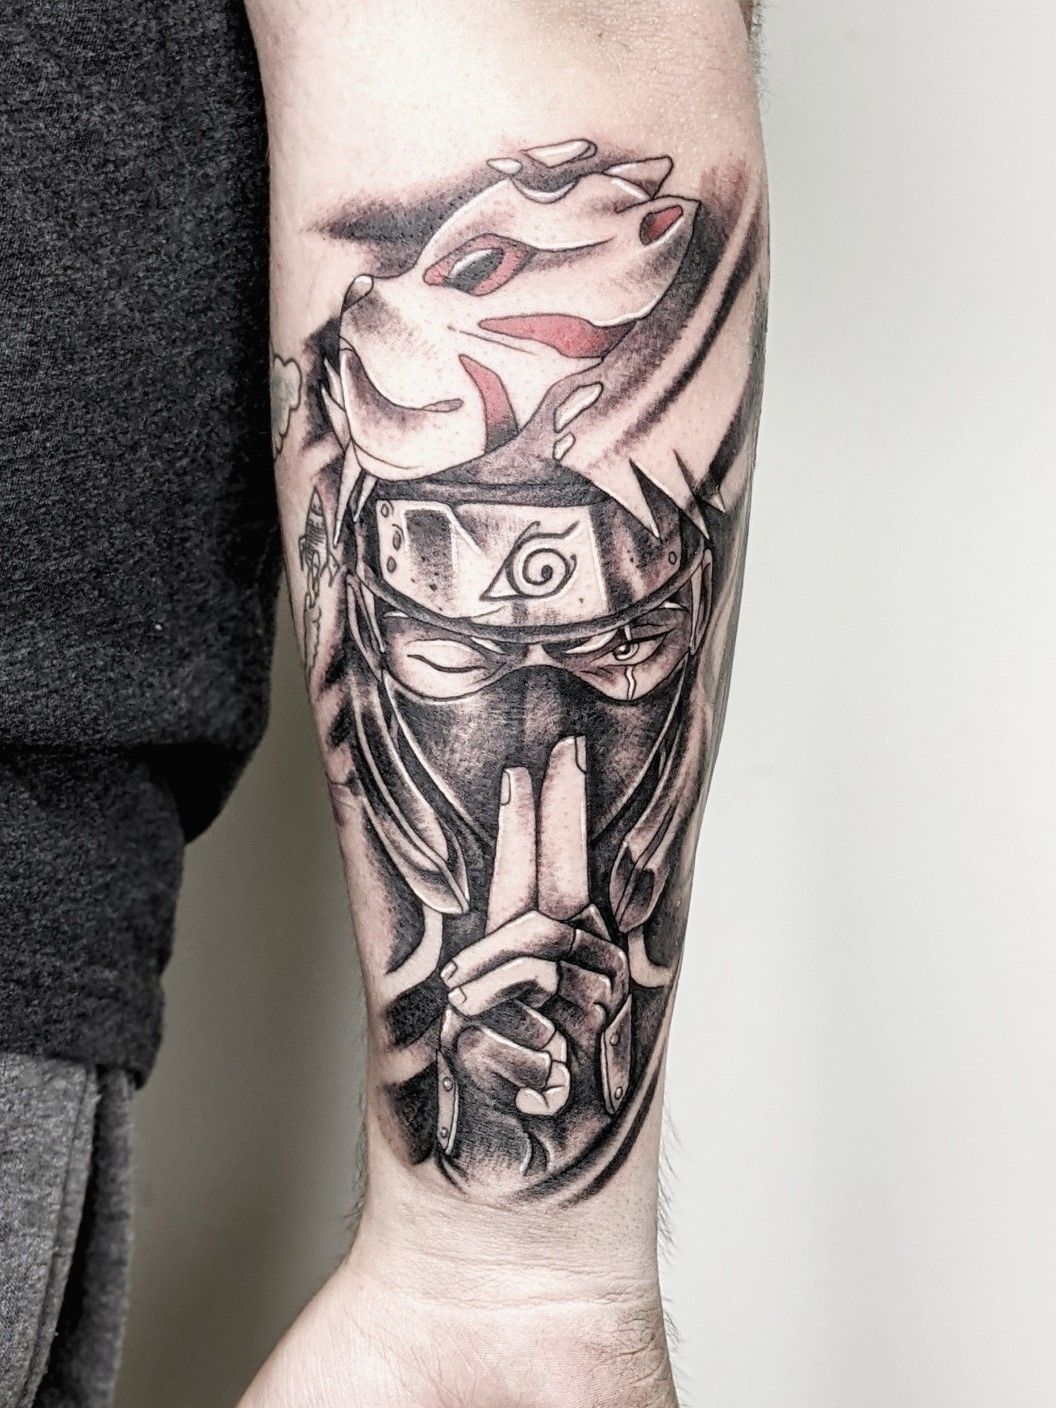 Kakashi on my right arm and Zuko on my left Done by one artist at Skull   LotusCalgary Alberta Artist is Jonathan  rtattoo